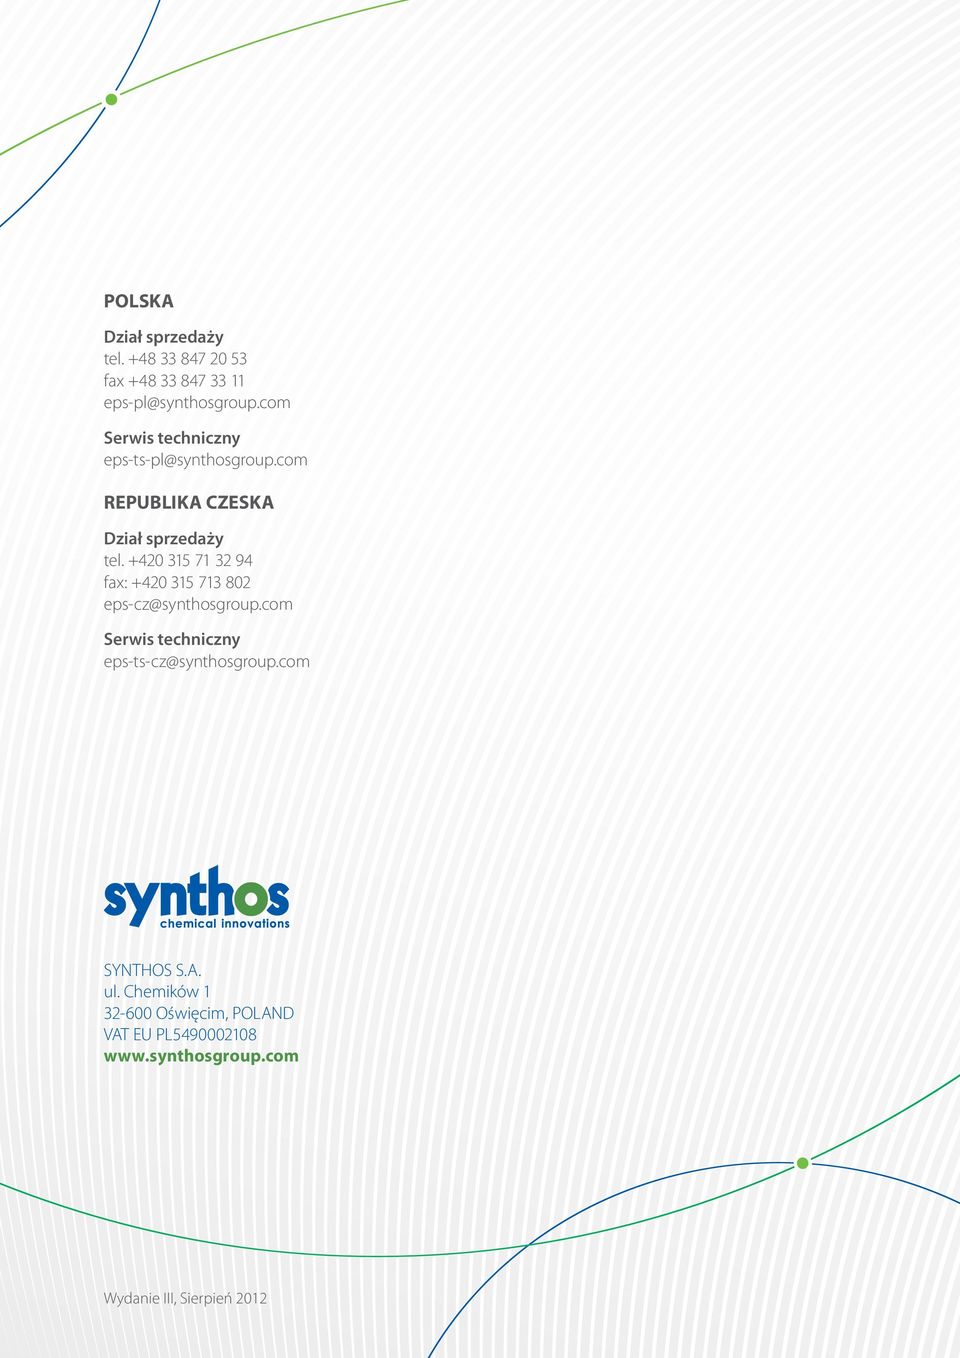 +420 315 71 32 94 fax: +420 315 713 802 eps-cz@synthosgroup.